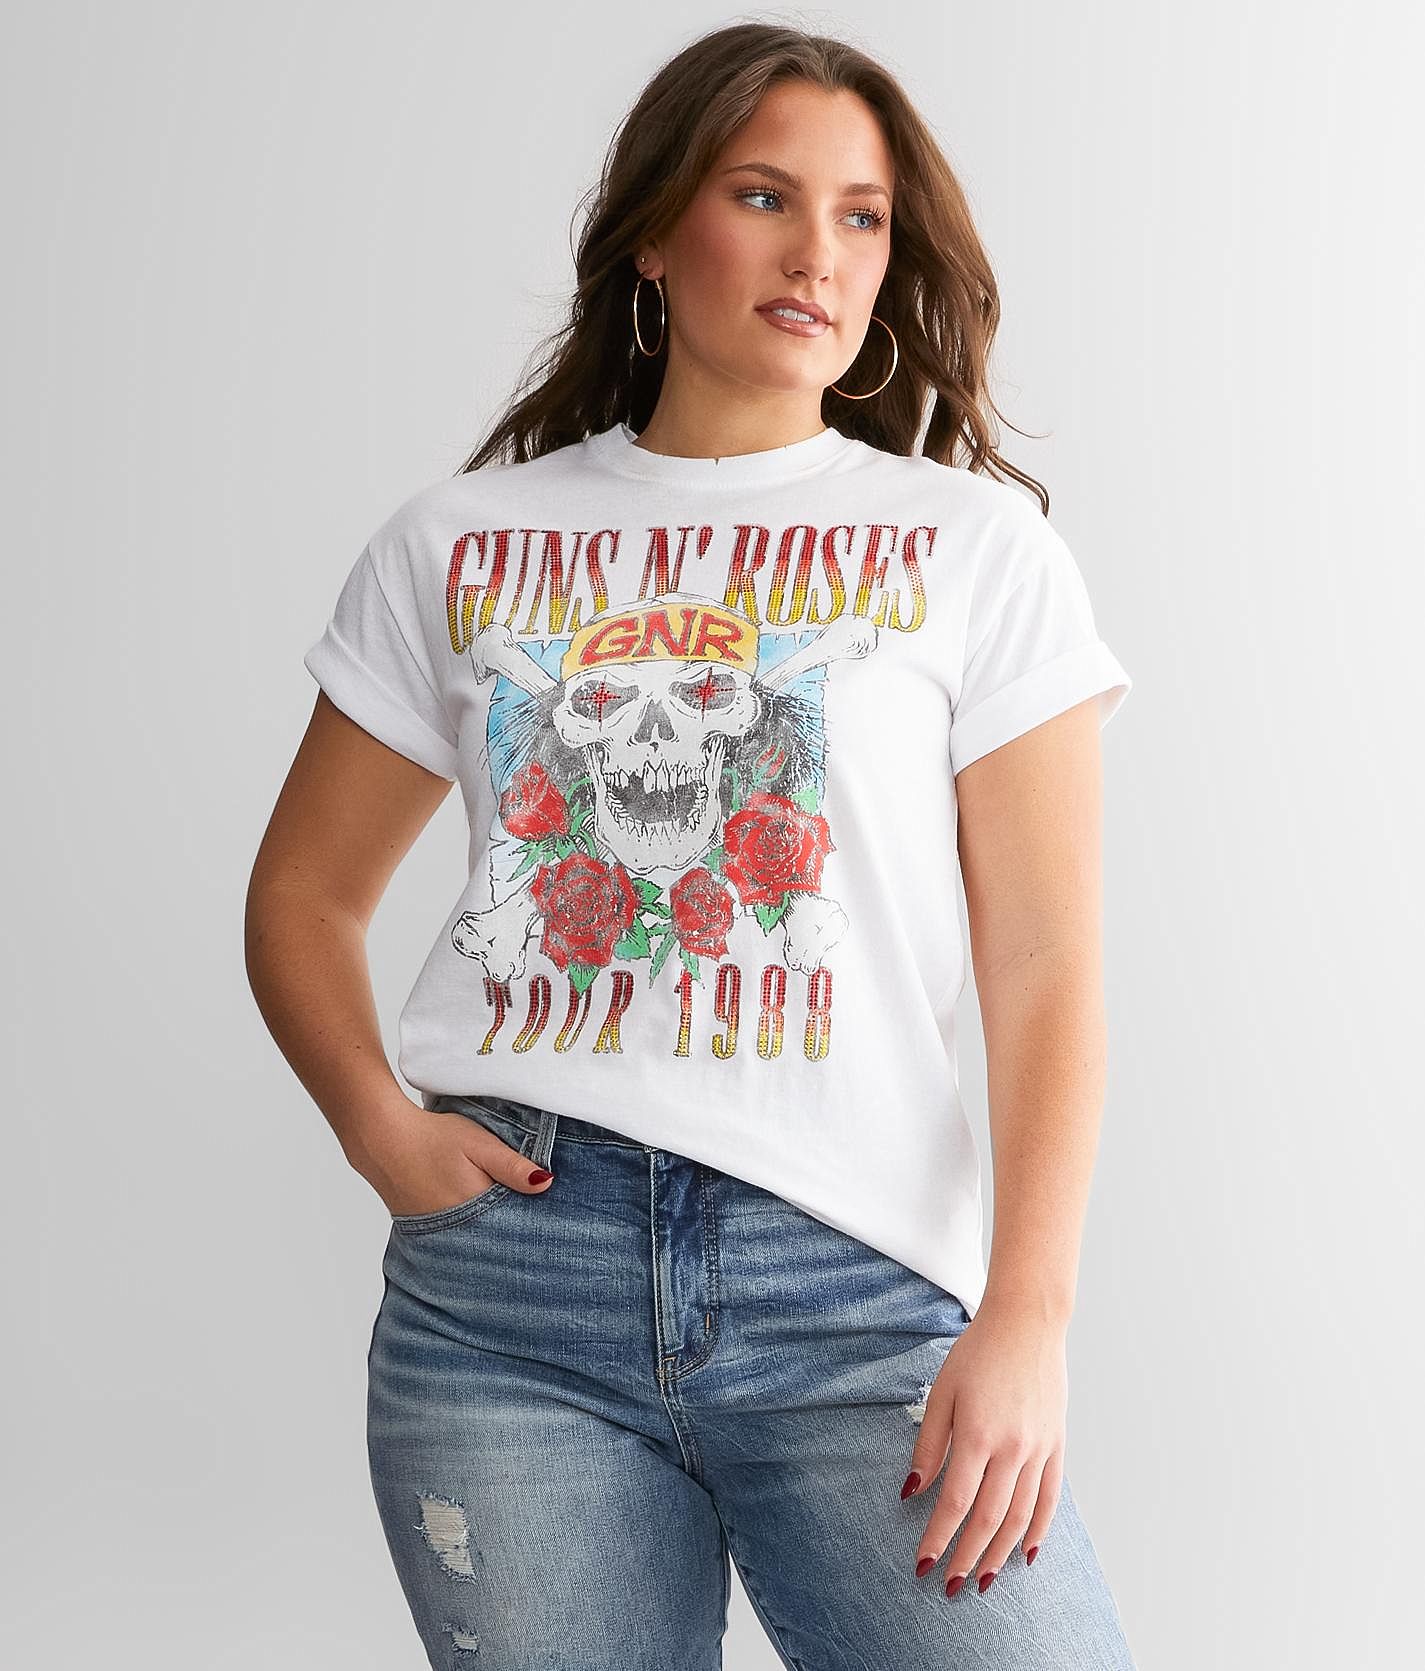 inflation Modsigelse hagl Guns N' Roses Band T-Shirt - Women's T-Shirts in White | Buckle